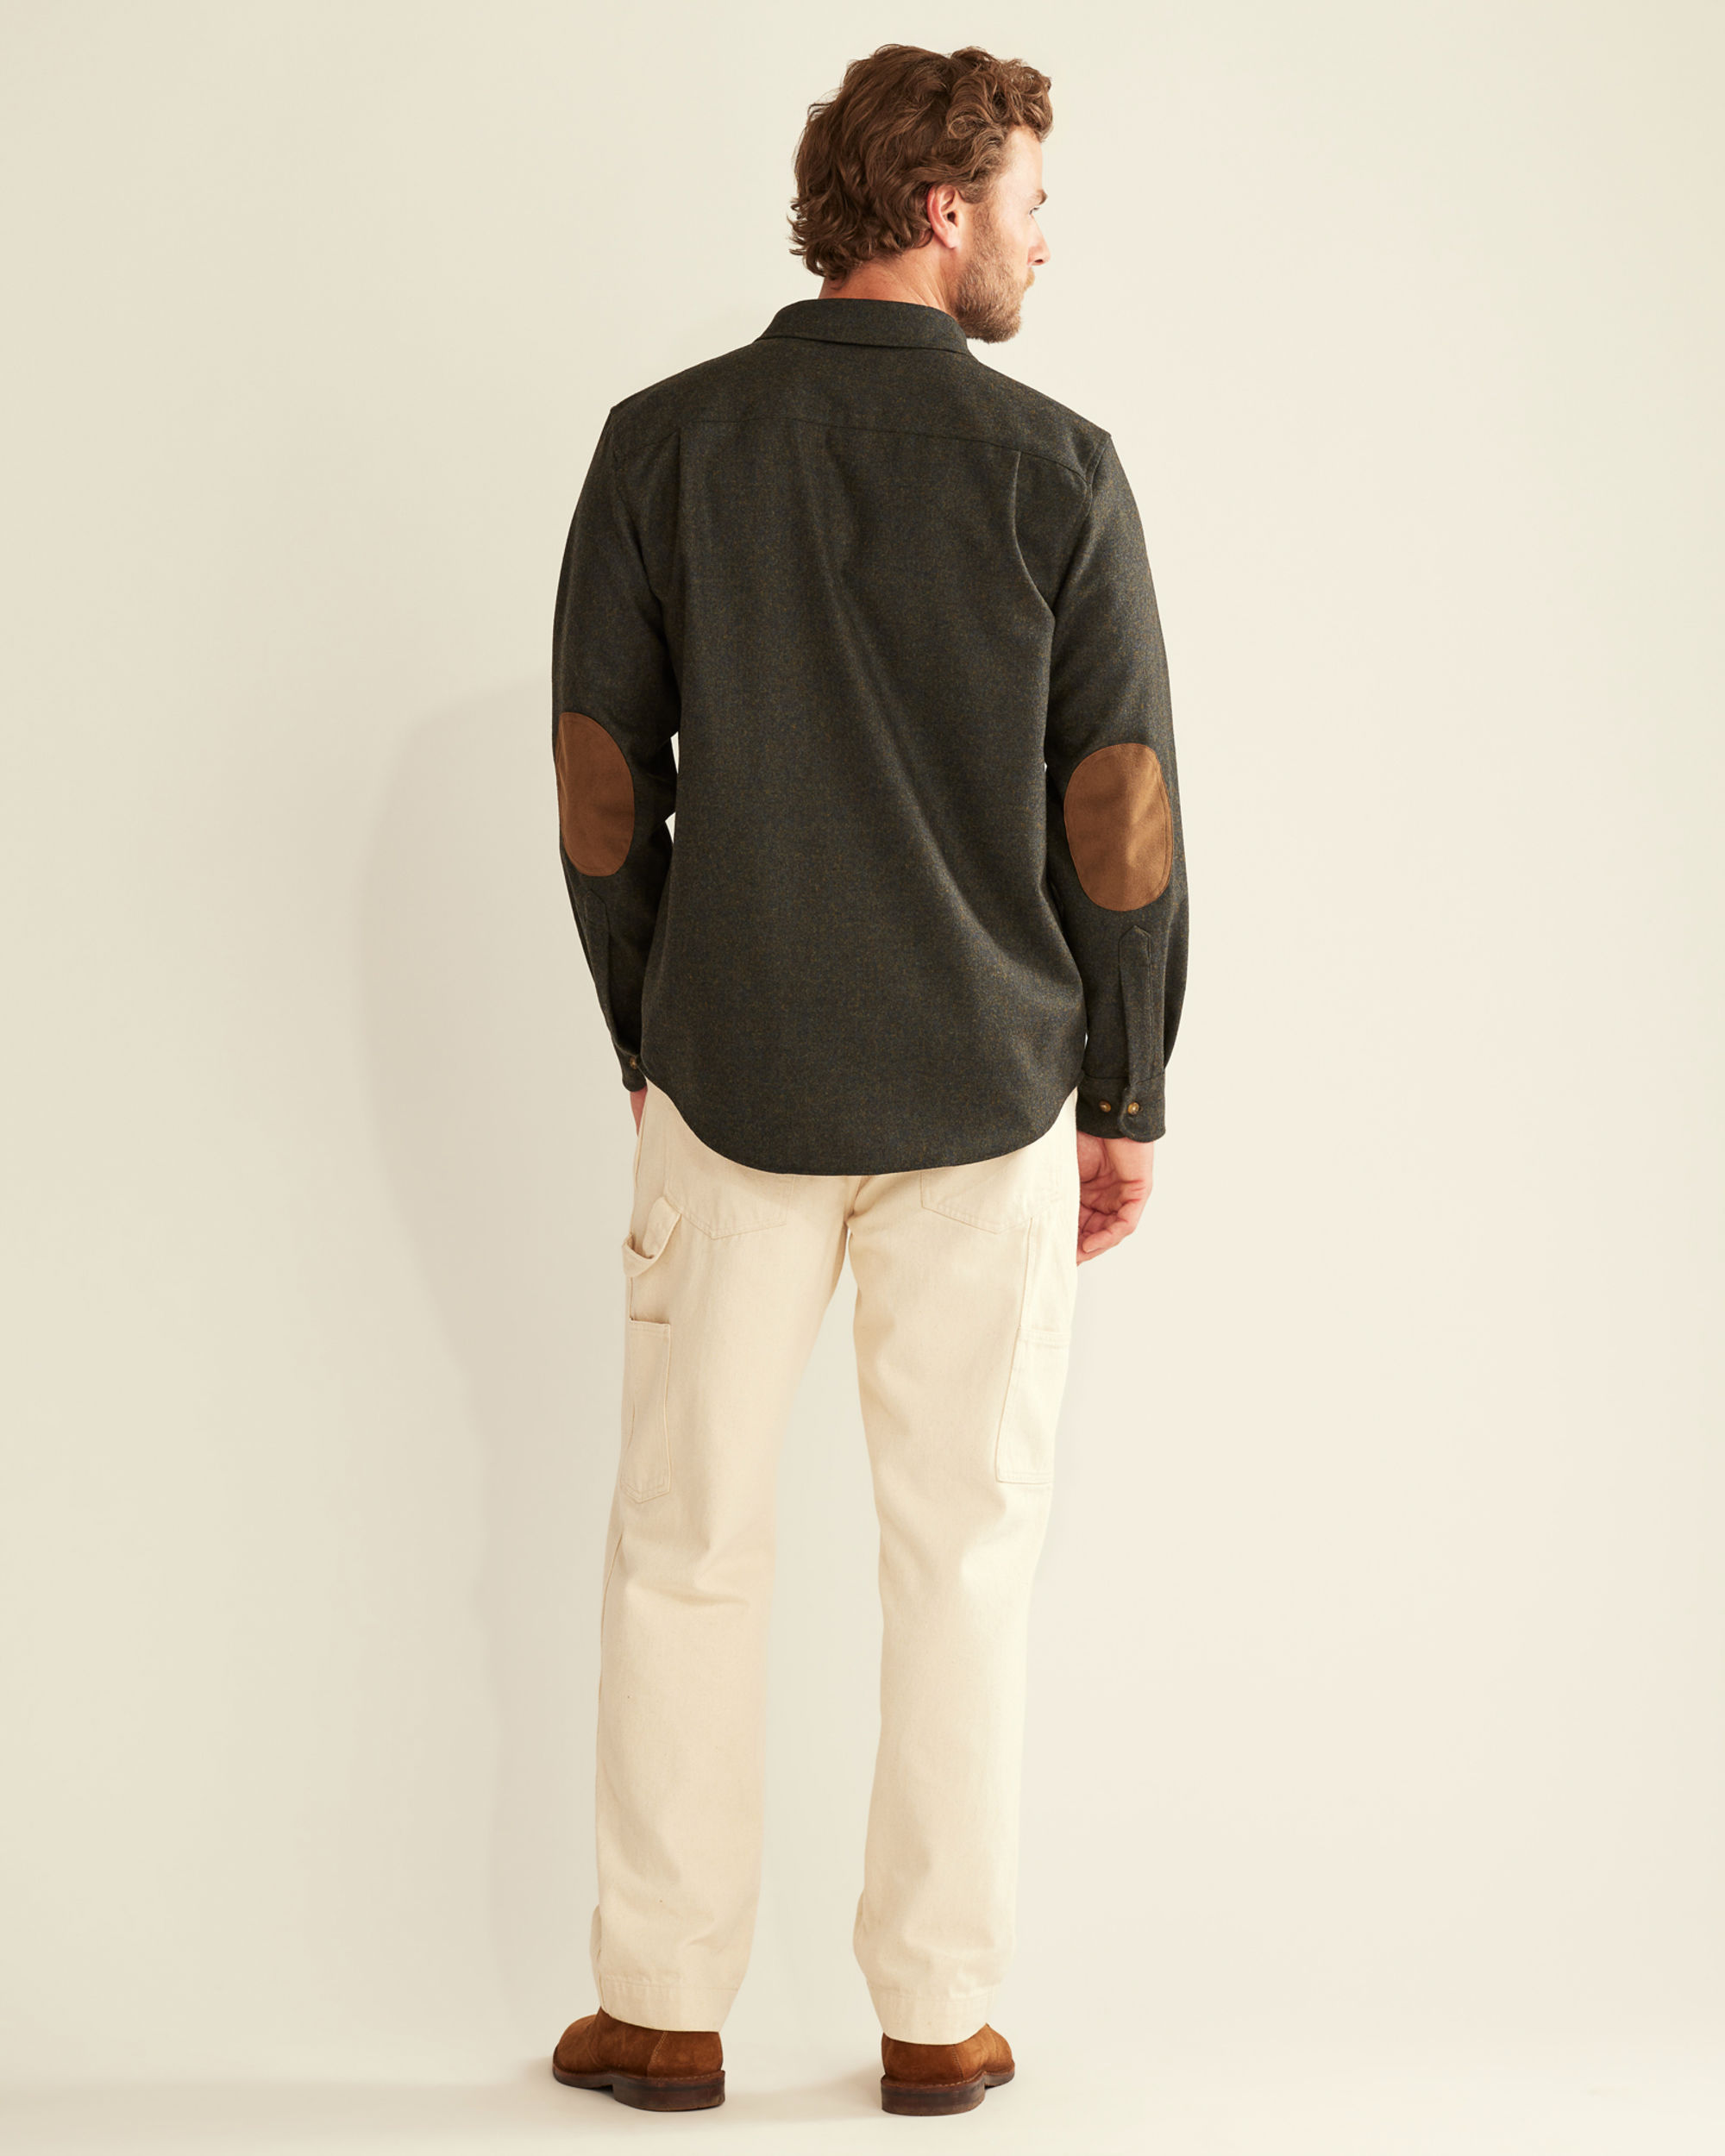 Men's Elbow-Patch Trail Shirt for Outdoor Adventures